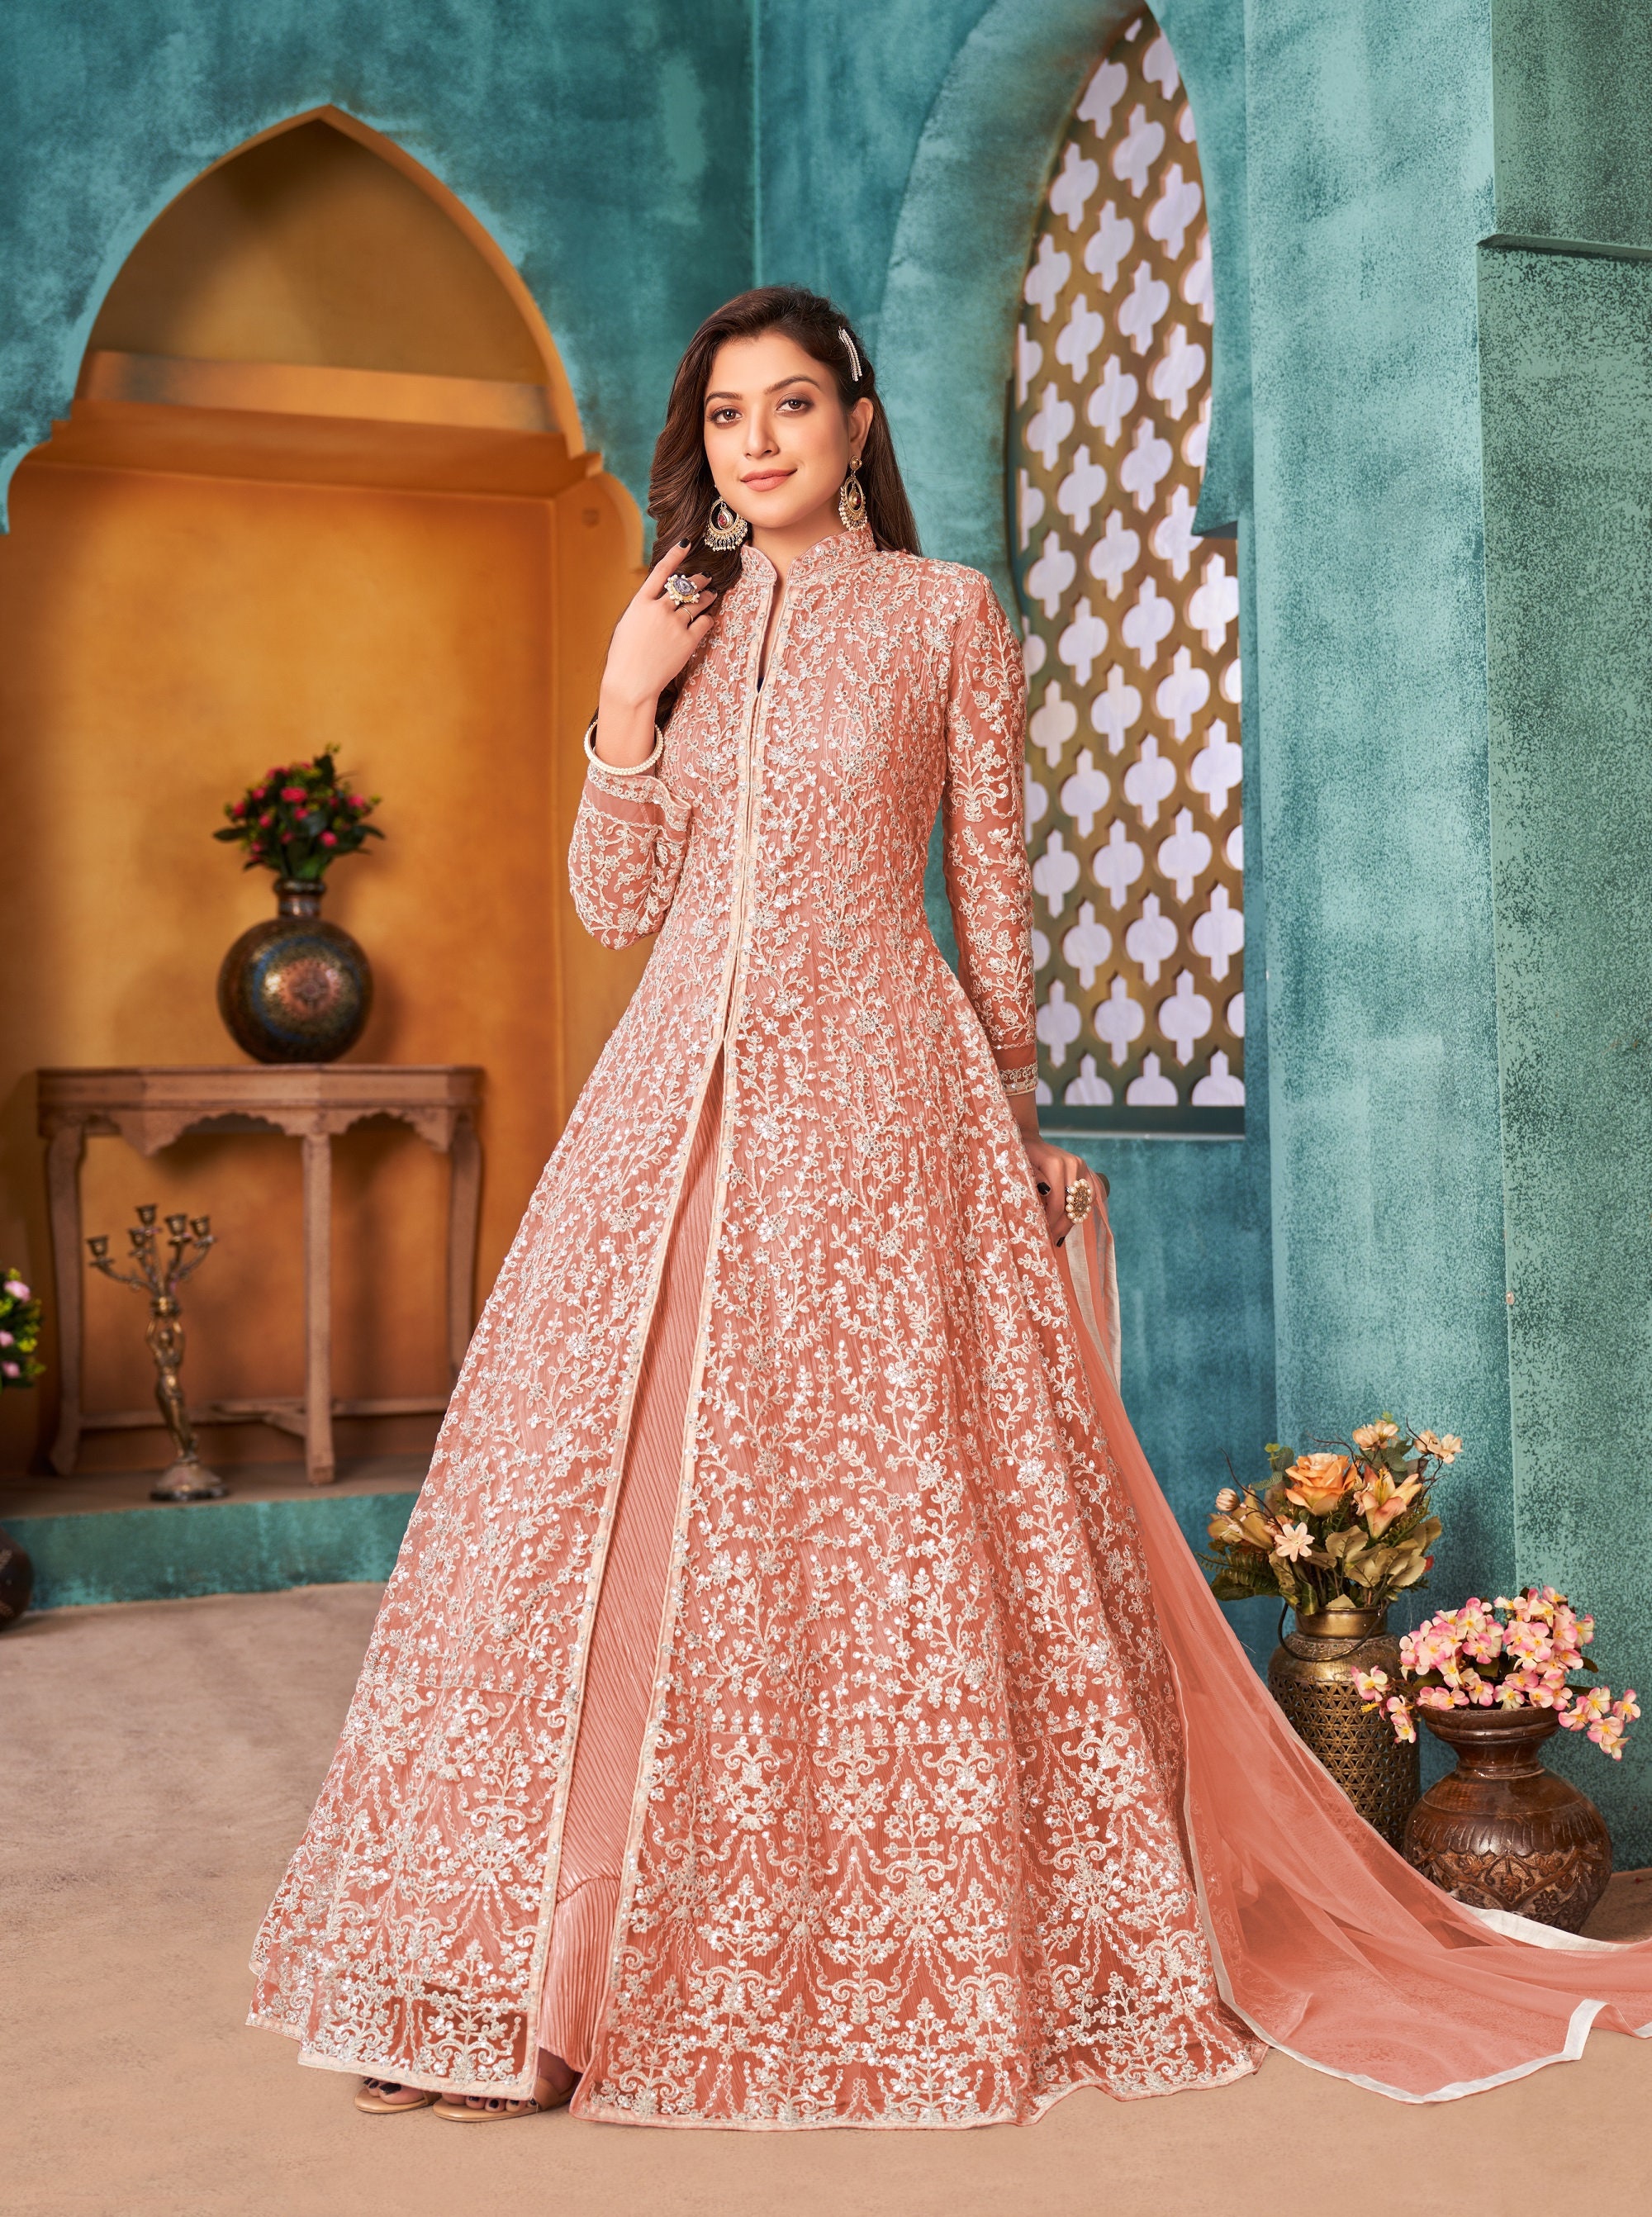 Exclusive Designer Net Gown For Women Floral Bride Gown Indian Wedding  Reception Gown Bridal Dress Indian Suit Floral Anarkali White Gown at Rs  1799.00 | Surat| ID: 26440674430